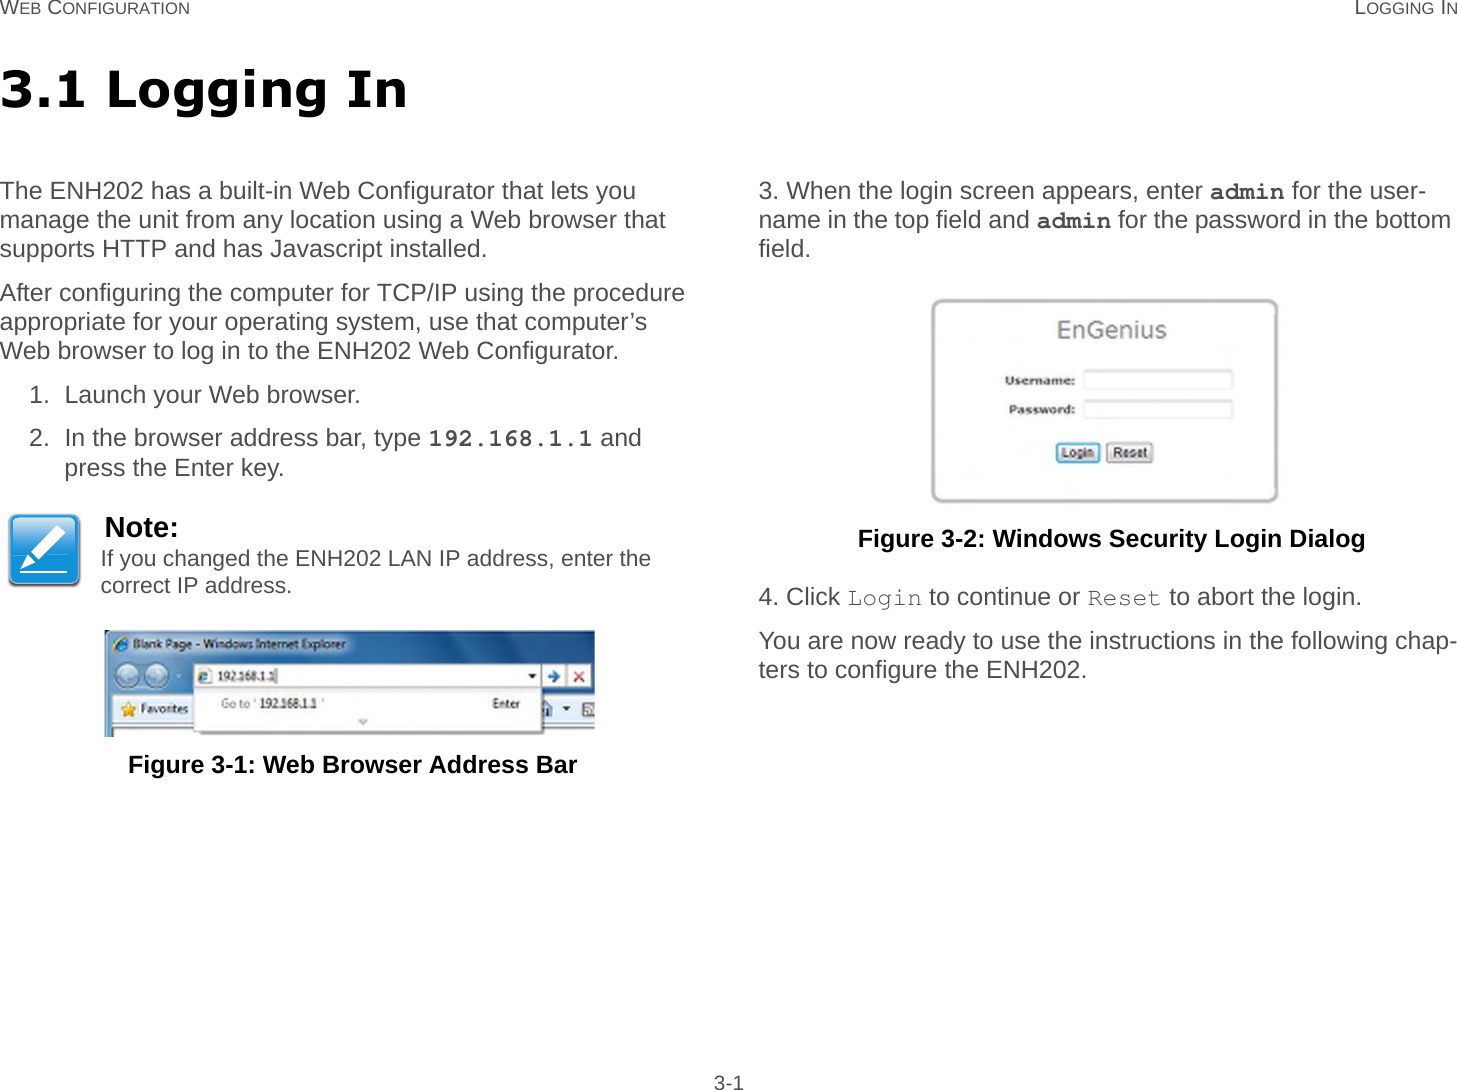 WEB CONFIGURATION LOGGING IN 3-13.1 Logging InThe ENH202 has a built-in Web Configurator that lets you   manage the unit from any location using a Web browser that supports HTTP and has Javascript installed.After configuring the computer for TCP/IP using the procedure appropriate for your operating system, use that computer’s Web browser to log in to the ENH202 Web Configurator.1. Launch your Web browser.2. In the browser address bar, type 192.168.1.1 and press the Enter key. Figure 3-1: Web Browser Address Bar3. When the login screen appears, enter admin for the user-name in the top field and admin for the password in the bottom field. Figure 3-2: Windows Security Login Dialog4. Click Login to continue or Reset to abort the login.You are now ready to use the instructions in the following chap-ters to configure the ENH202.Note:If you changed the ENH202 LAN IP address, enter the correct IP address.